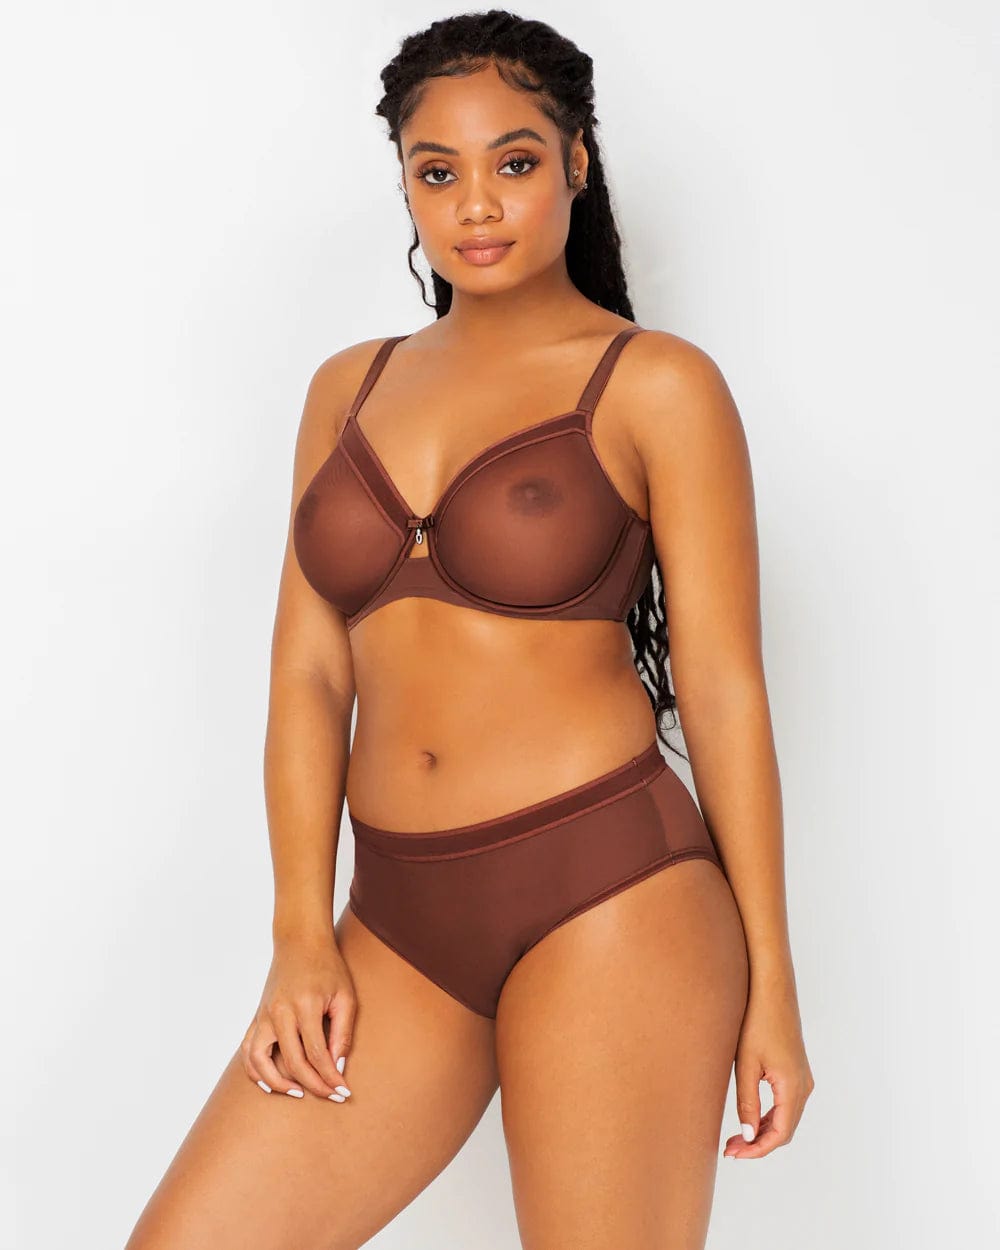 Sheer Mesh Unlined Underwire Bra - Chocolate - Chérie Amour